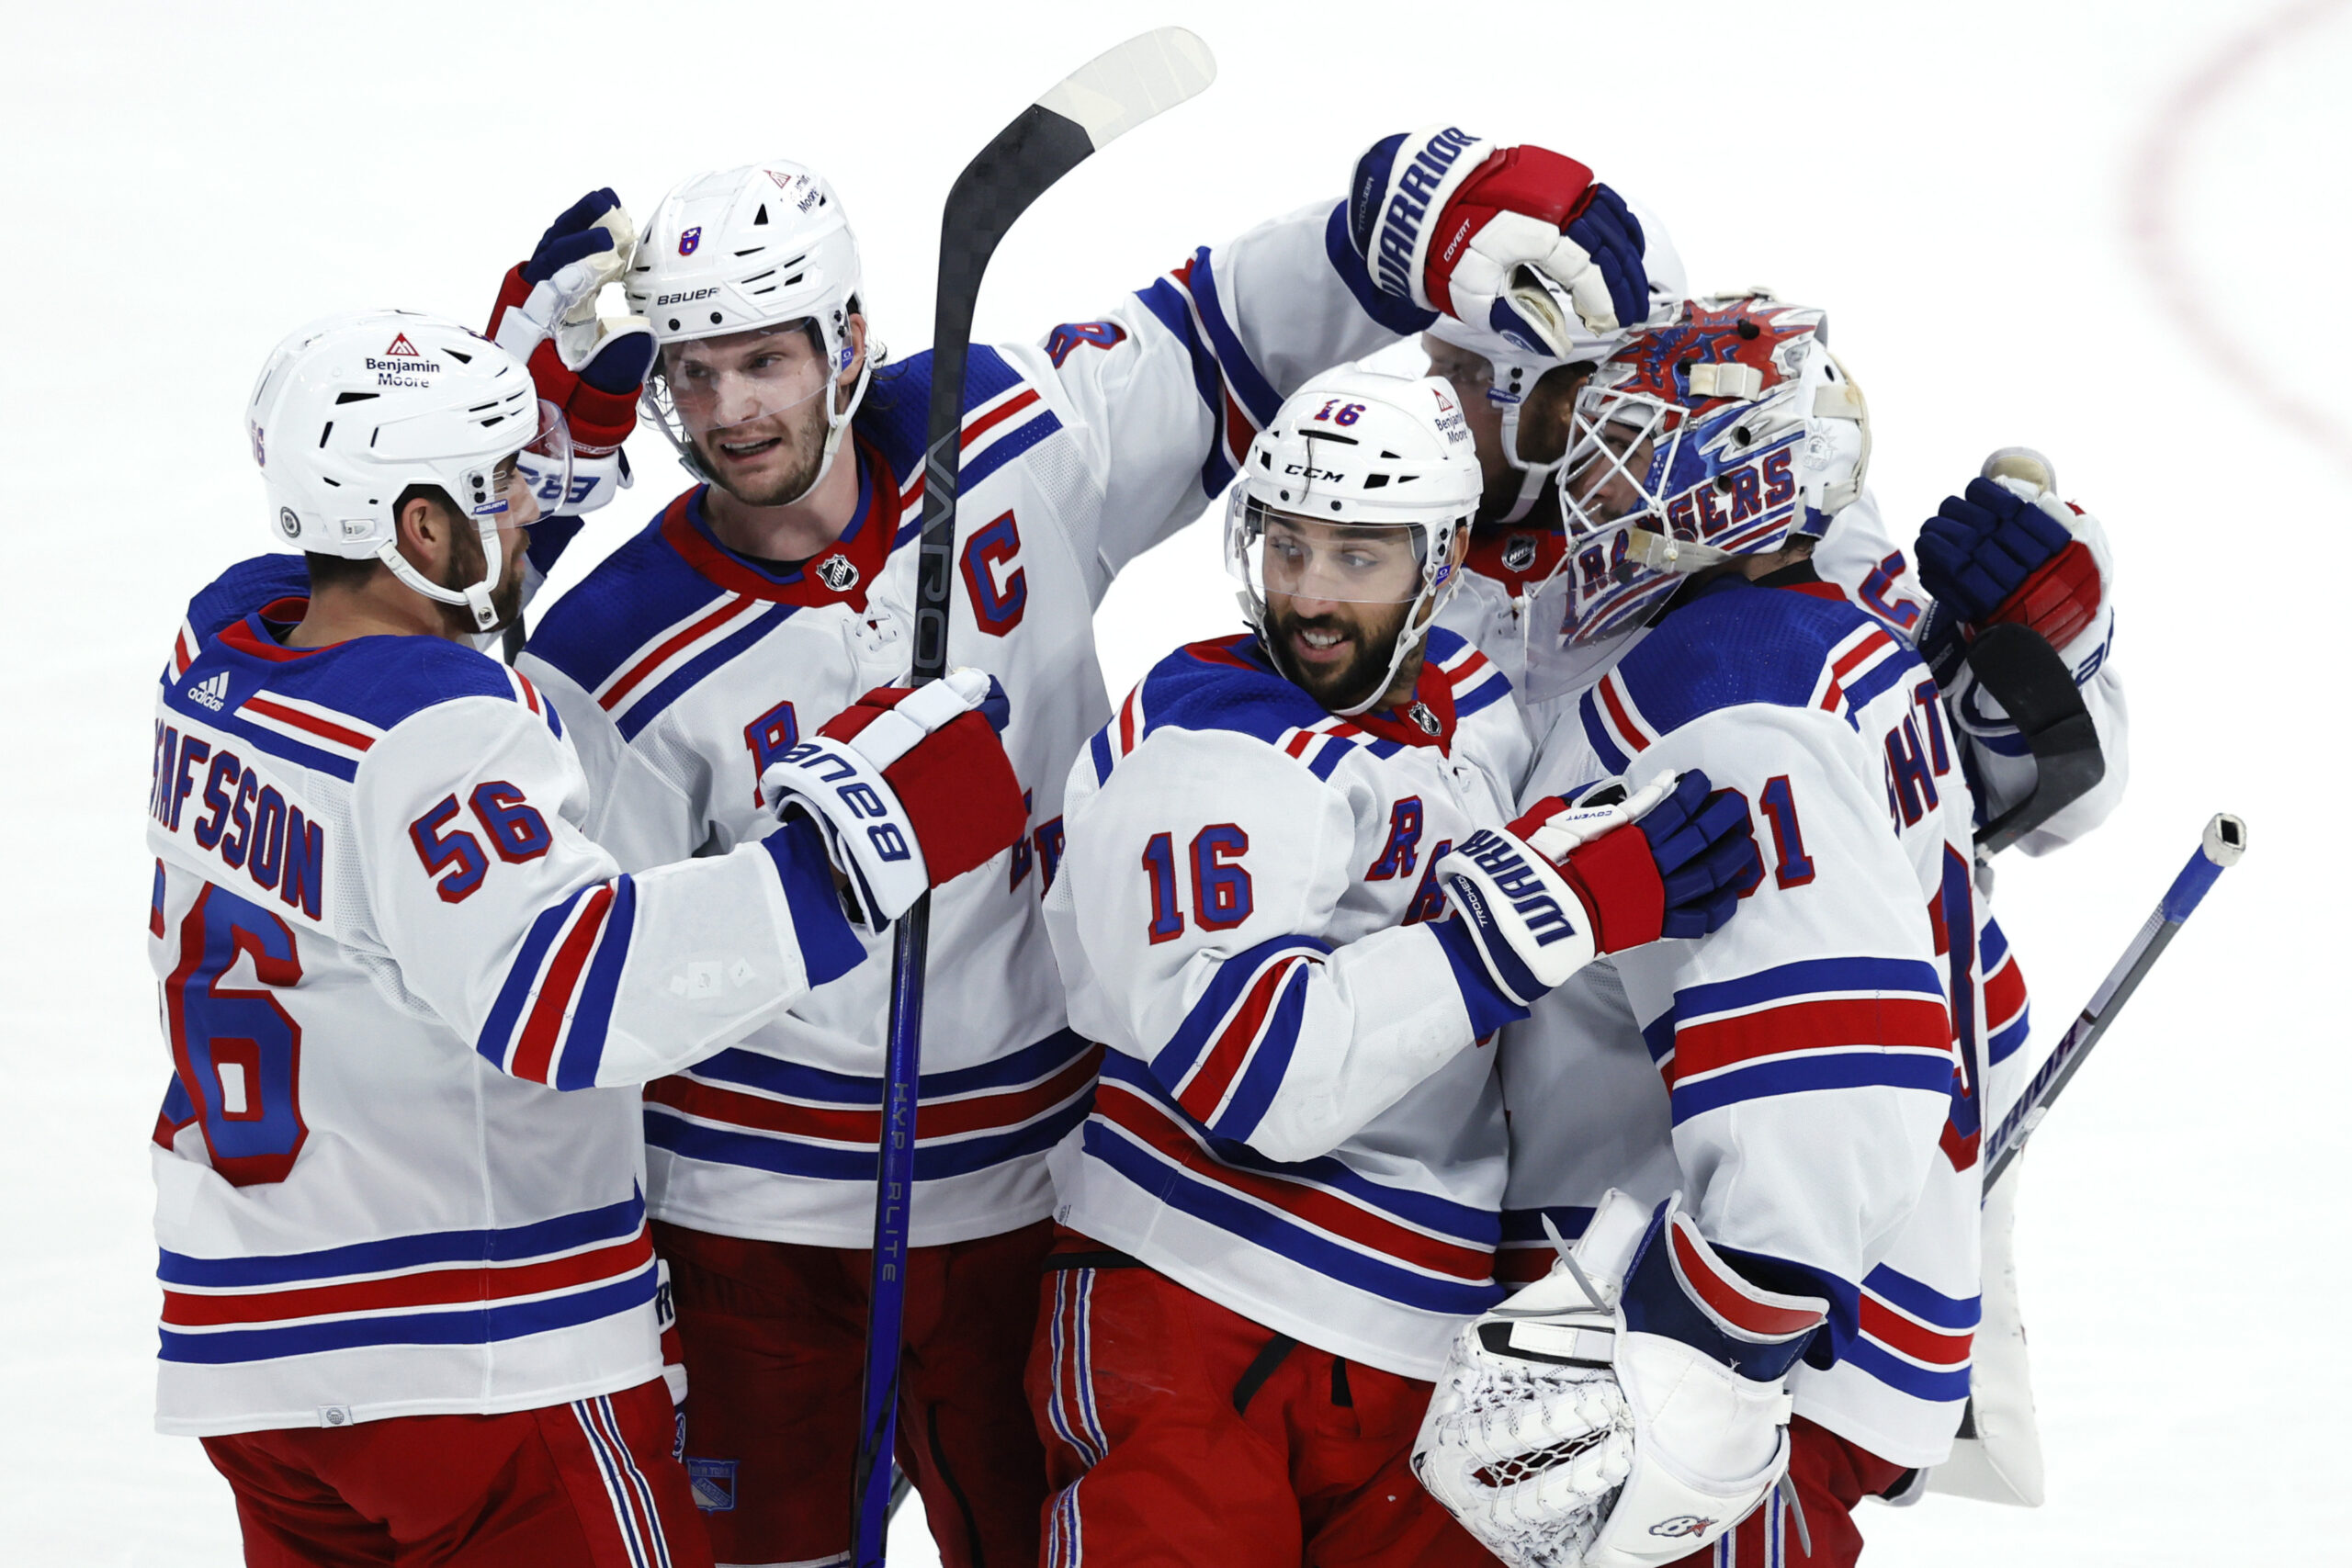 Rangers Complete Historic Road Trip In First Five-Game Sweep